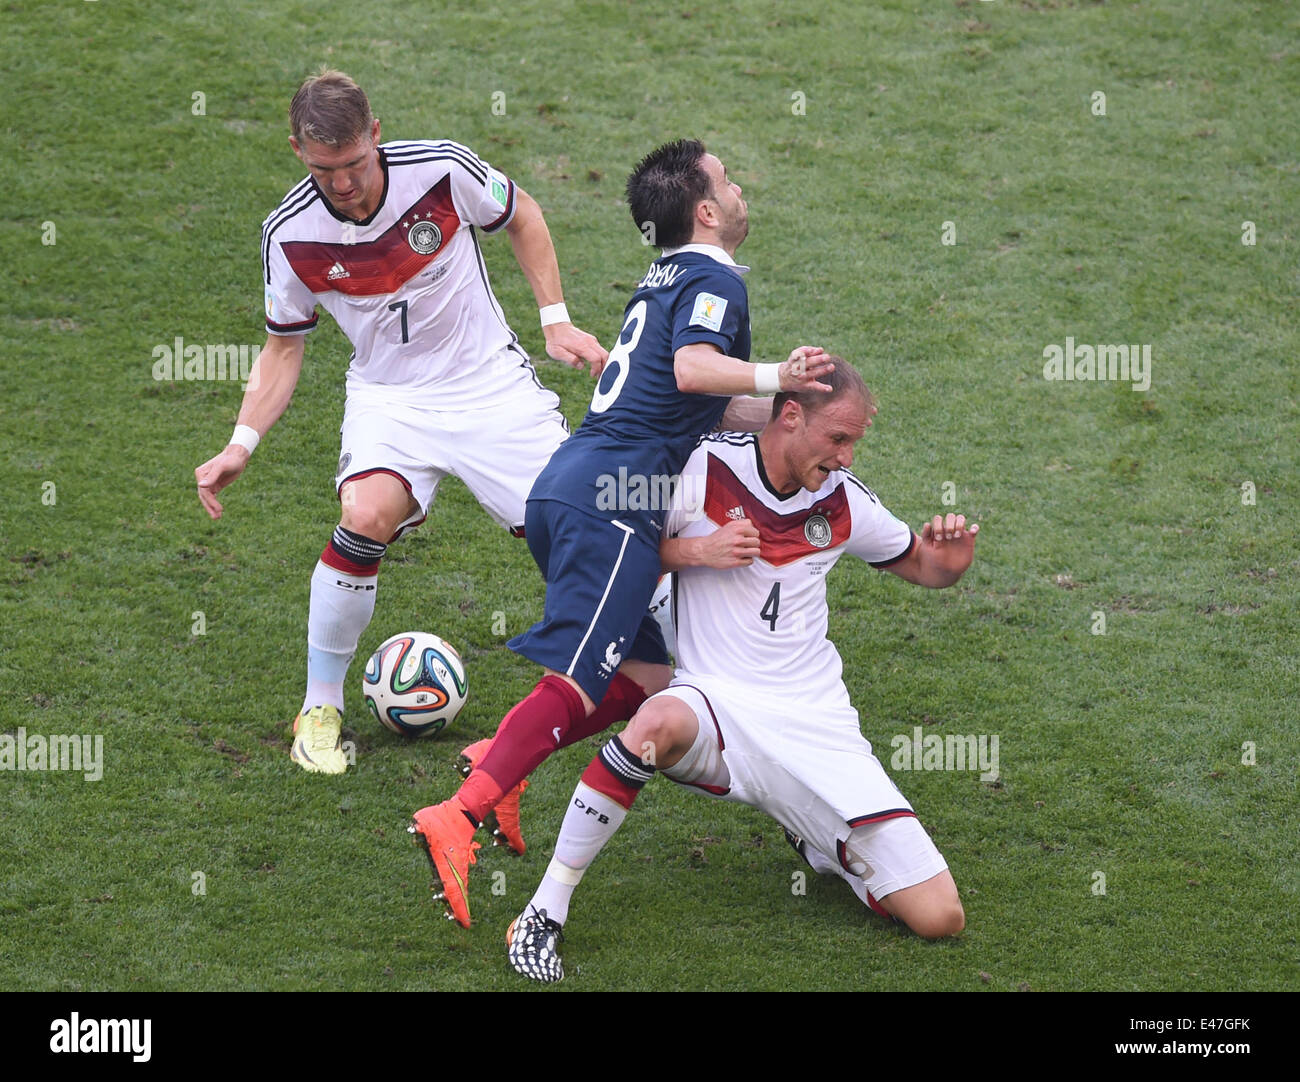 Rio de Janeiro, Brazil. 04th July, 2014. Bastian Schweinsteiger (L) and Benedikt Hoewedes (R) of Germany vie for the ball with Mathieu Valbuena of France during the FIFA World Cup 2014 quarter final soccer match between France and Germany at Estadio do Maracana in Rio de Janeiro, Brazil, 04 July 2014. Photo: Marcus Brandt/dpa/Alamy Live News Stock Photo